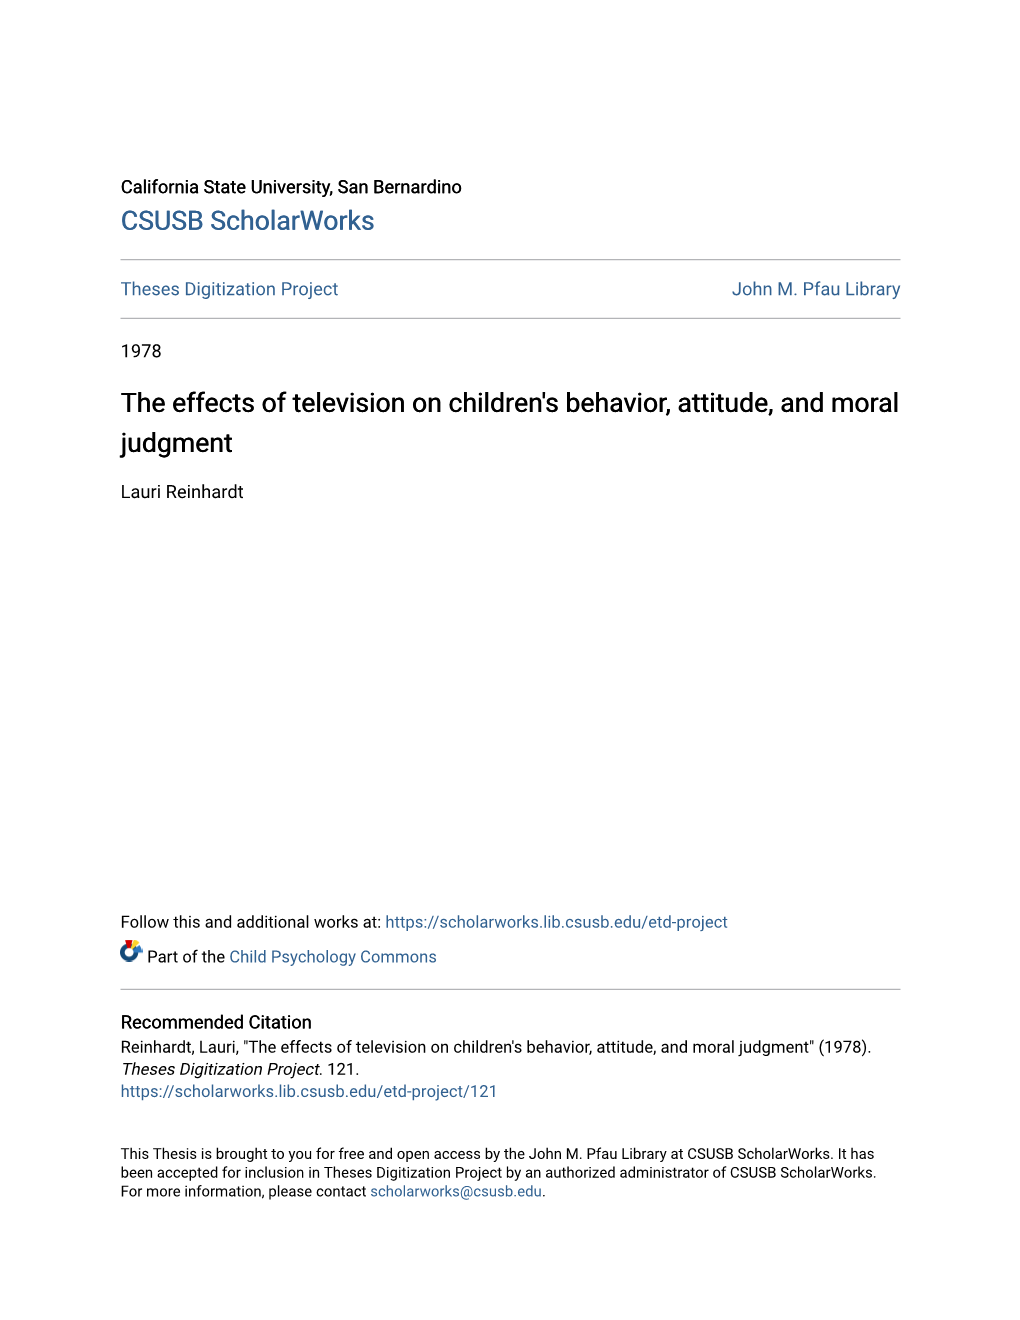 The Effects of Television on Children's Behavior, Attitude, and Moral Judgment